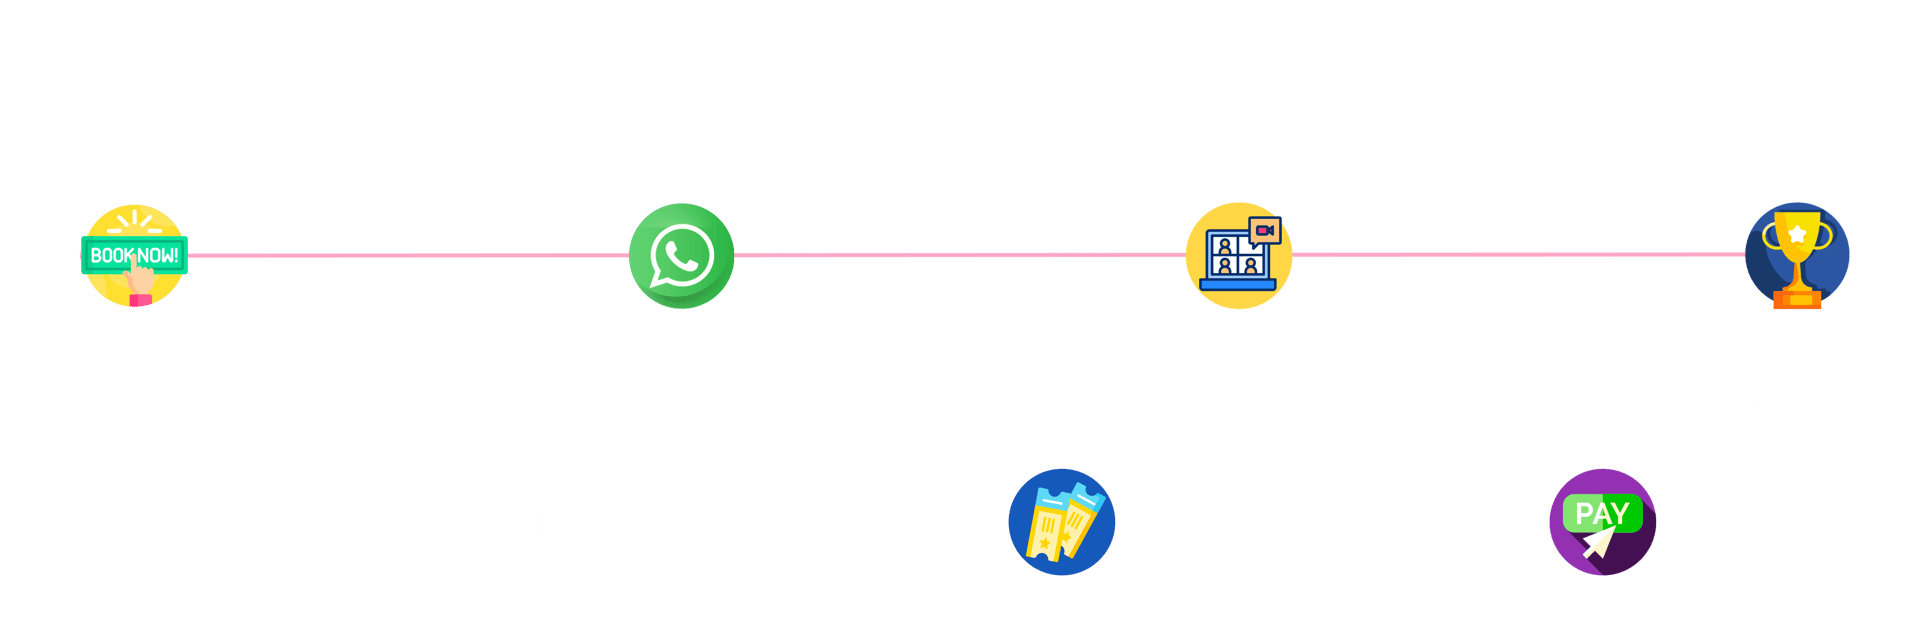 How the contest works